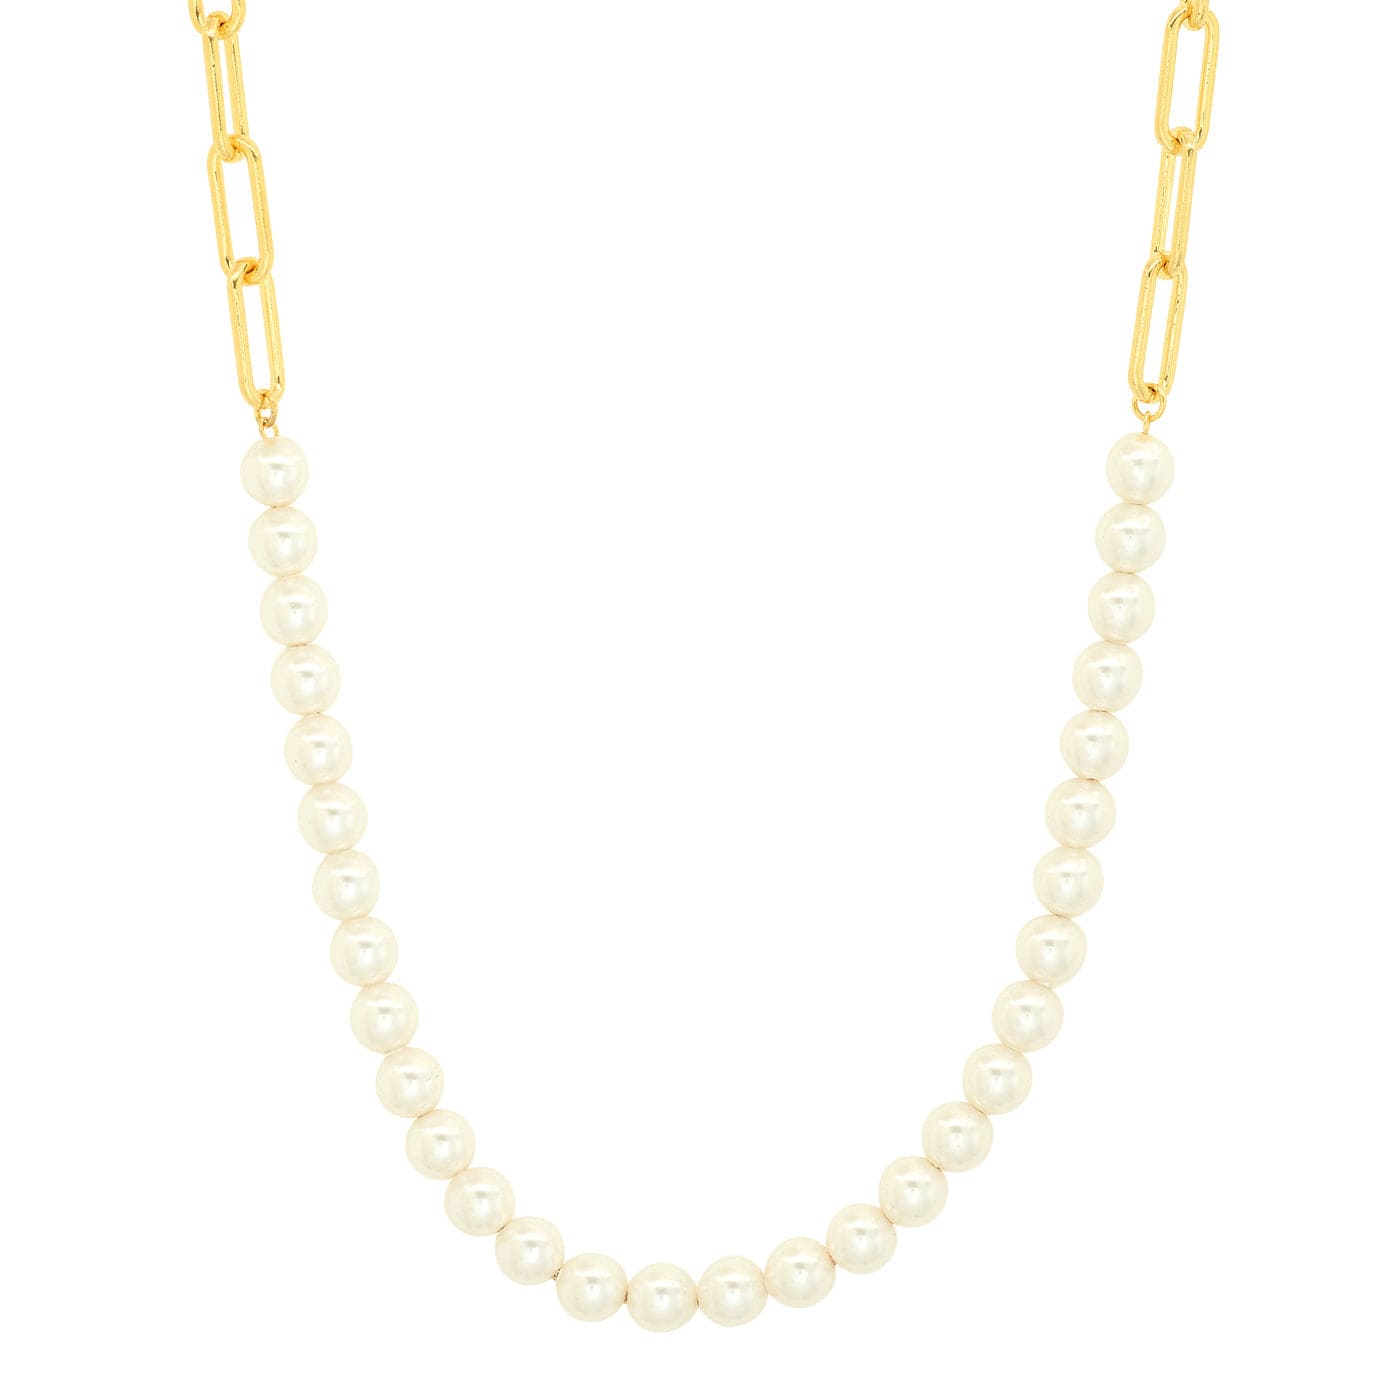 NKL-VRM Gold Vermeil Link Chain Necklace with Freshwater Pearls